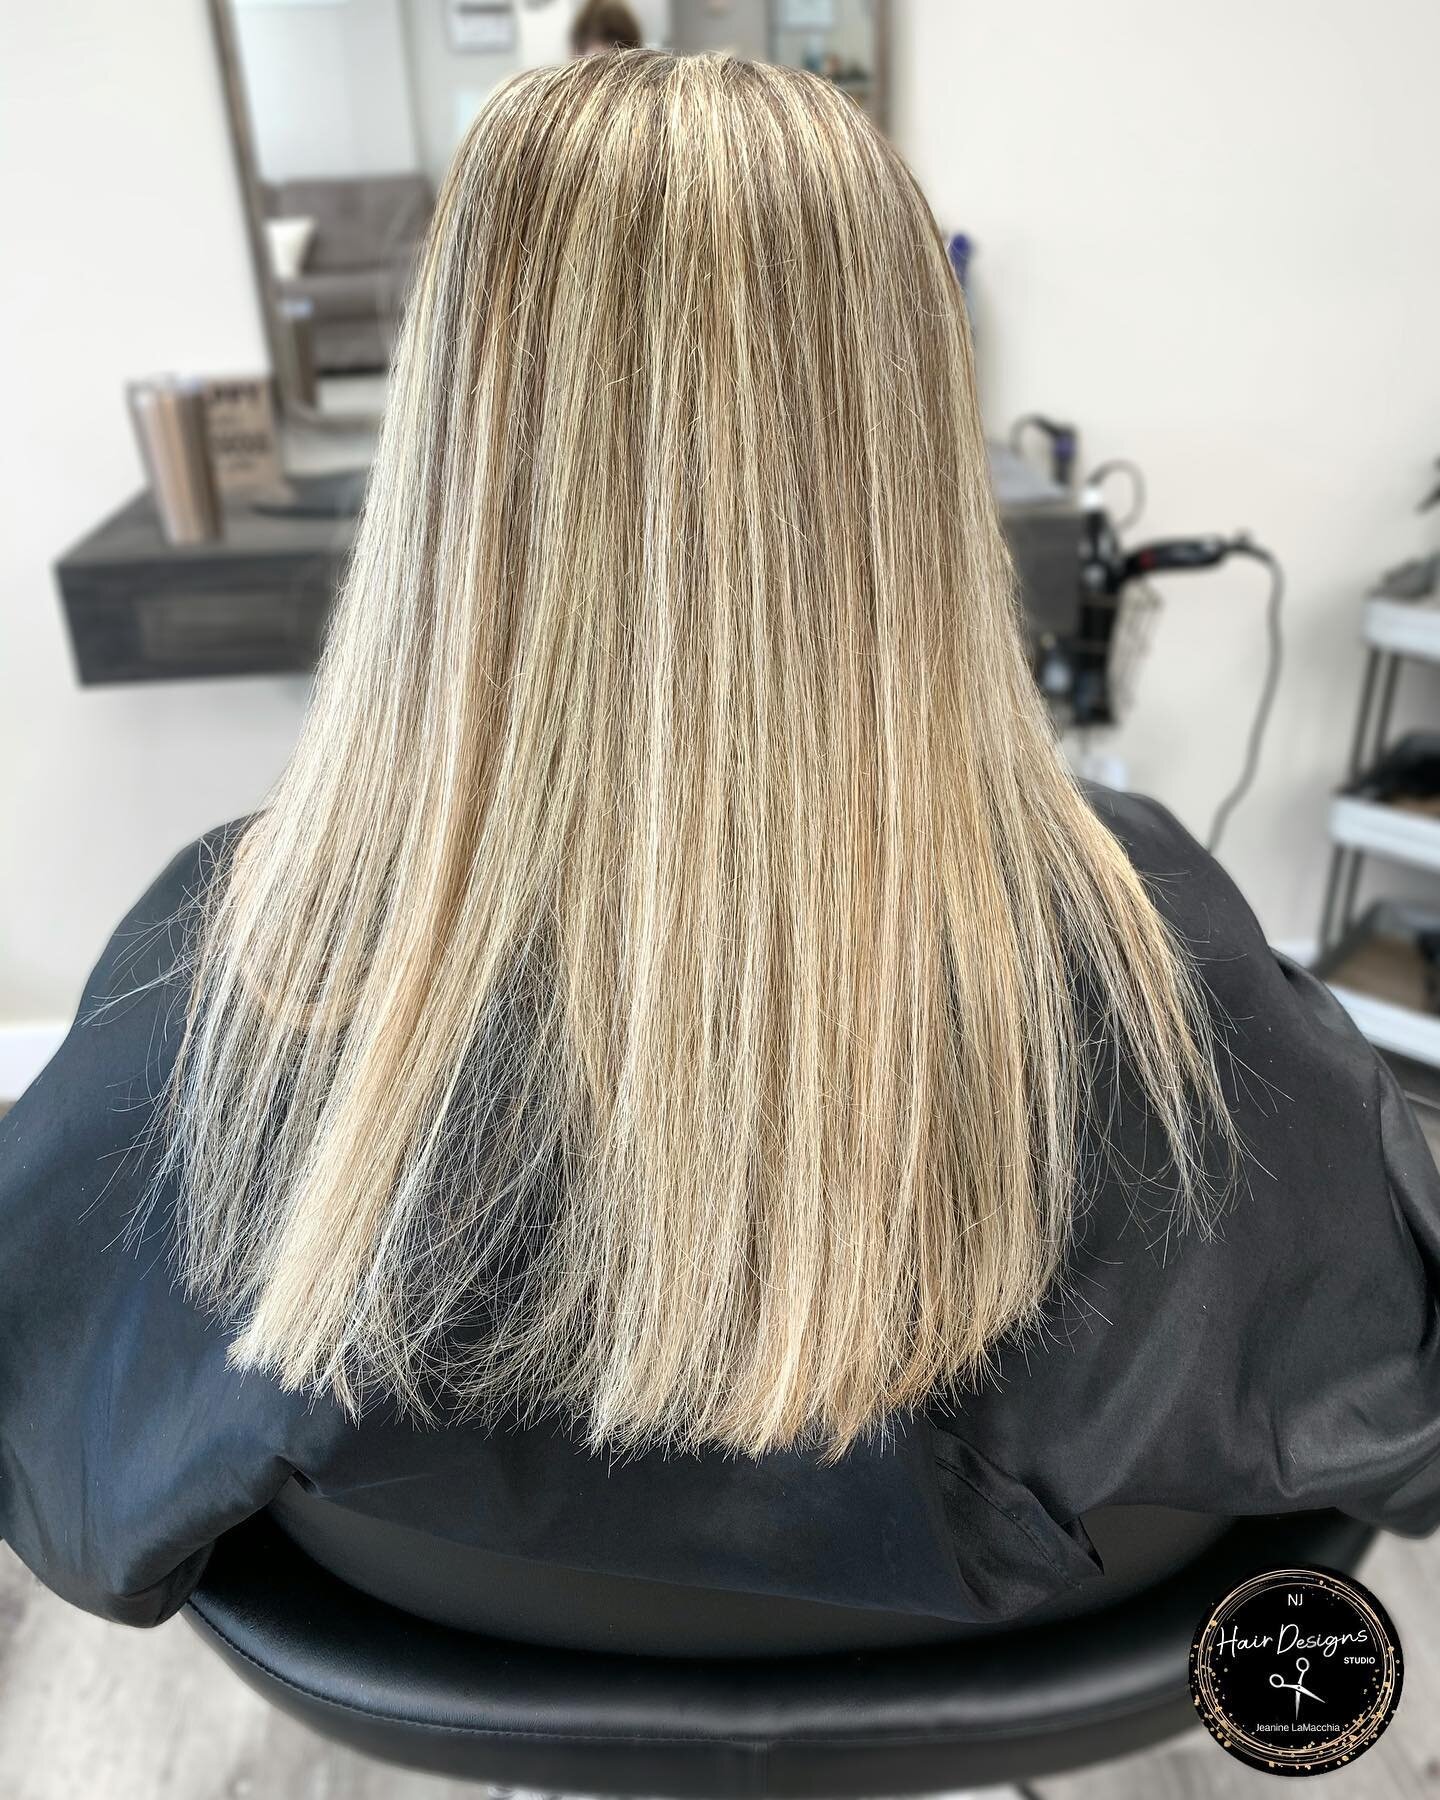 ⭐️Complete Color⭐️

#hairstylist #bestofnjbeauty #healthyhair #hairstyles #haircare #blondebalayage #brunettehighlights #haircolor #modernsalon #njhairstylist #hairbyme #njhairdesigns #haircut #balayage #freshcuts #highlights #haircolor #blondehair #